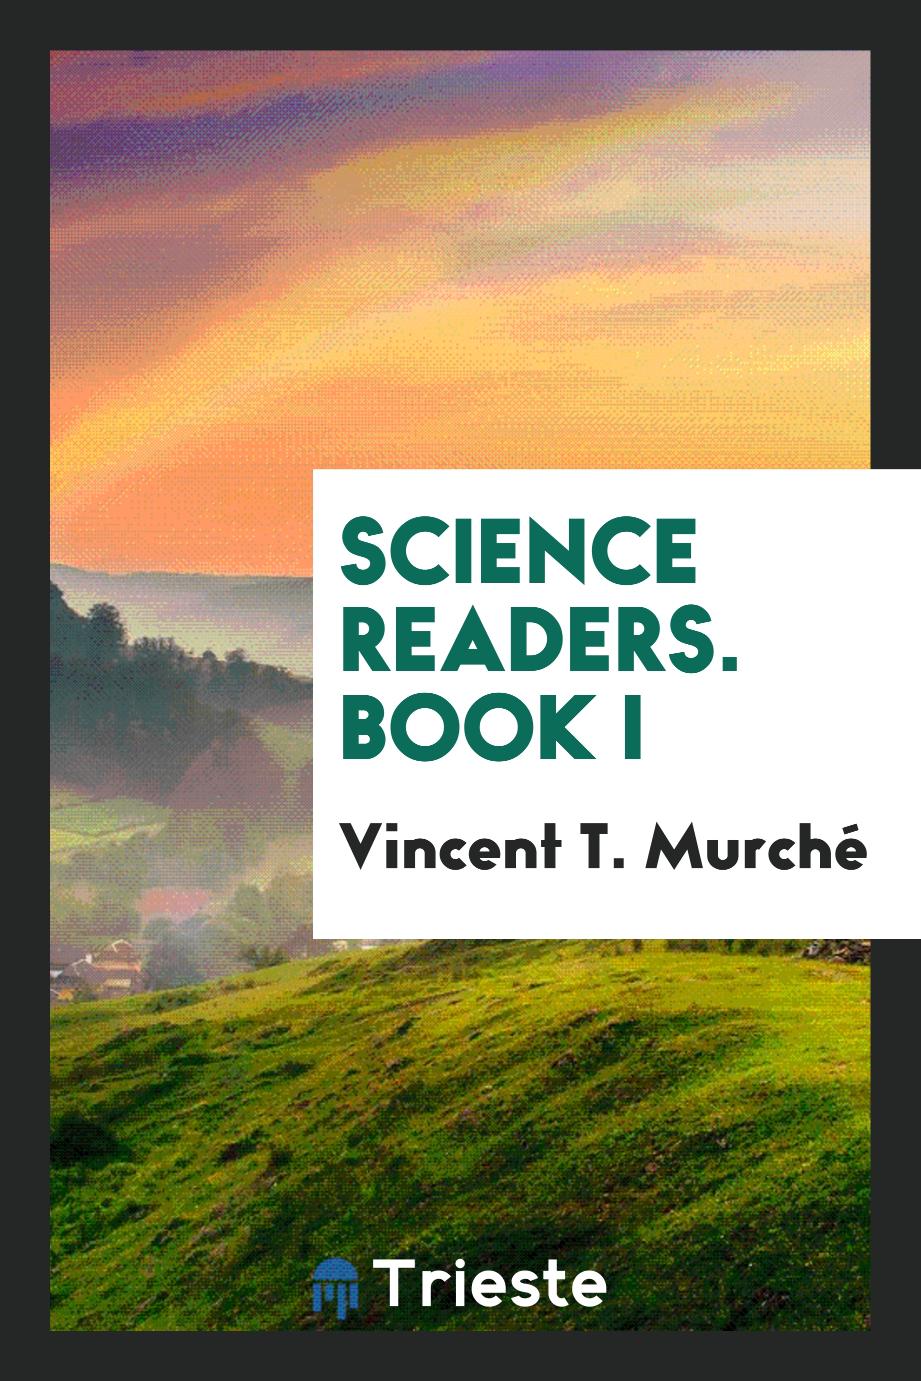 Science Readers. Book I